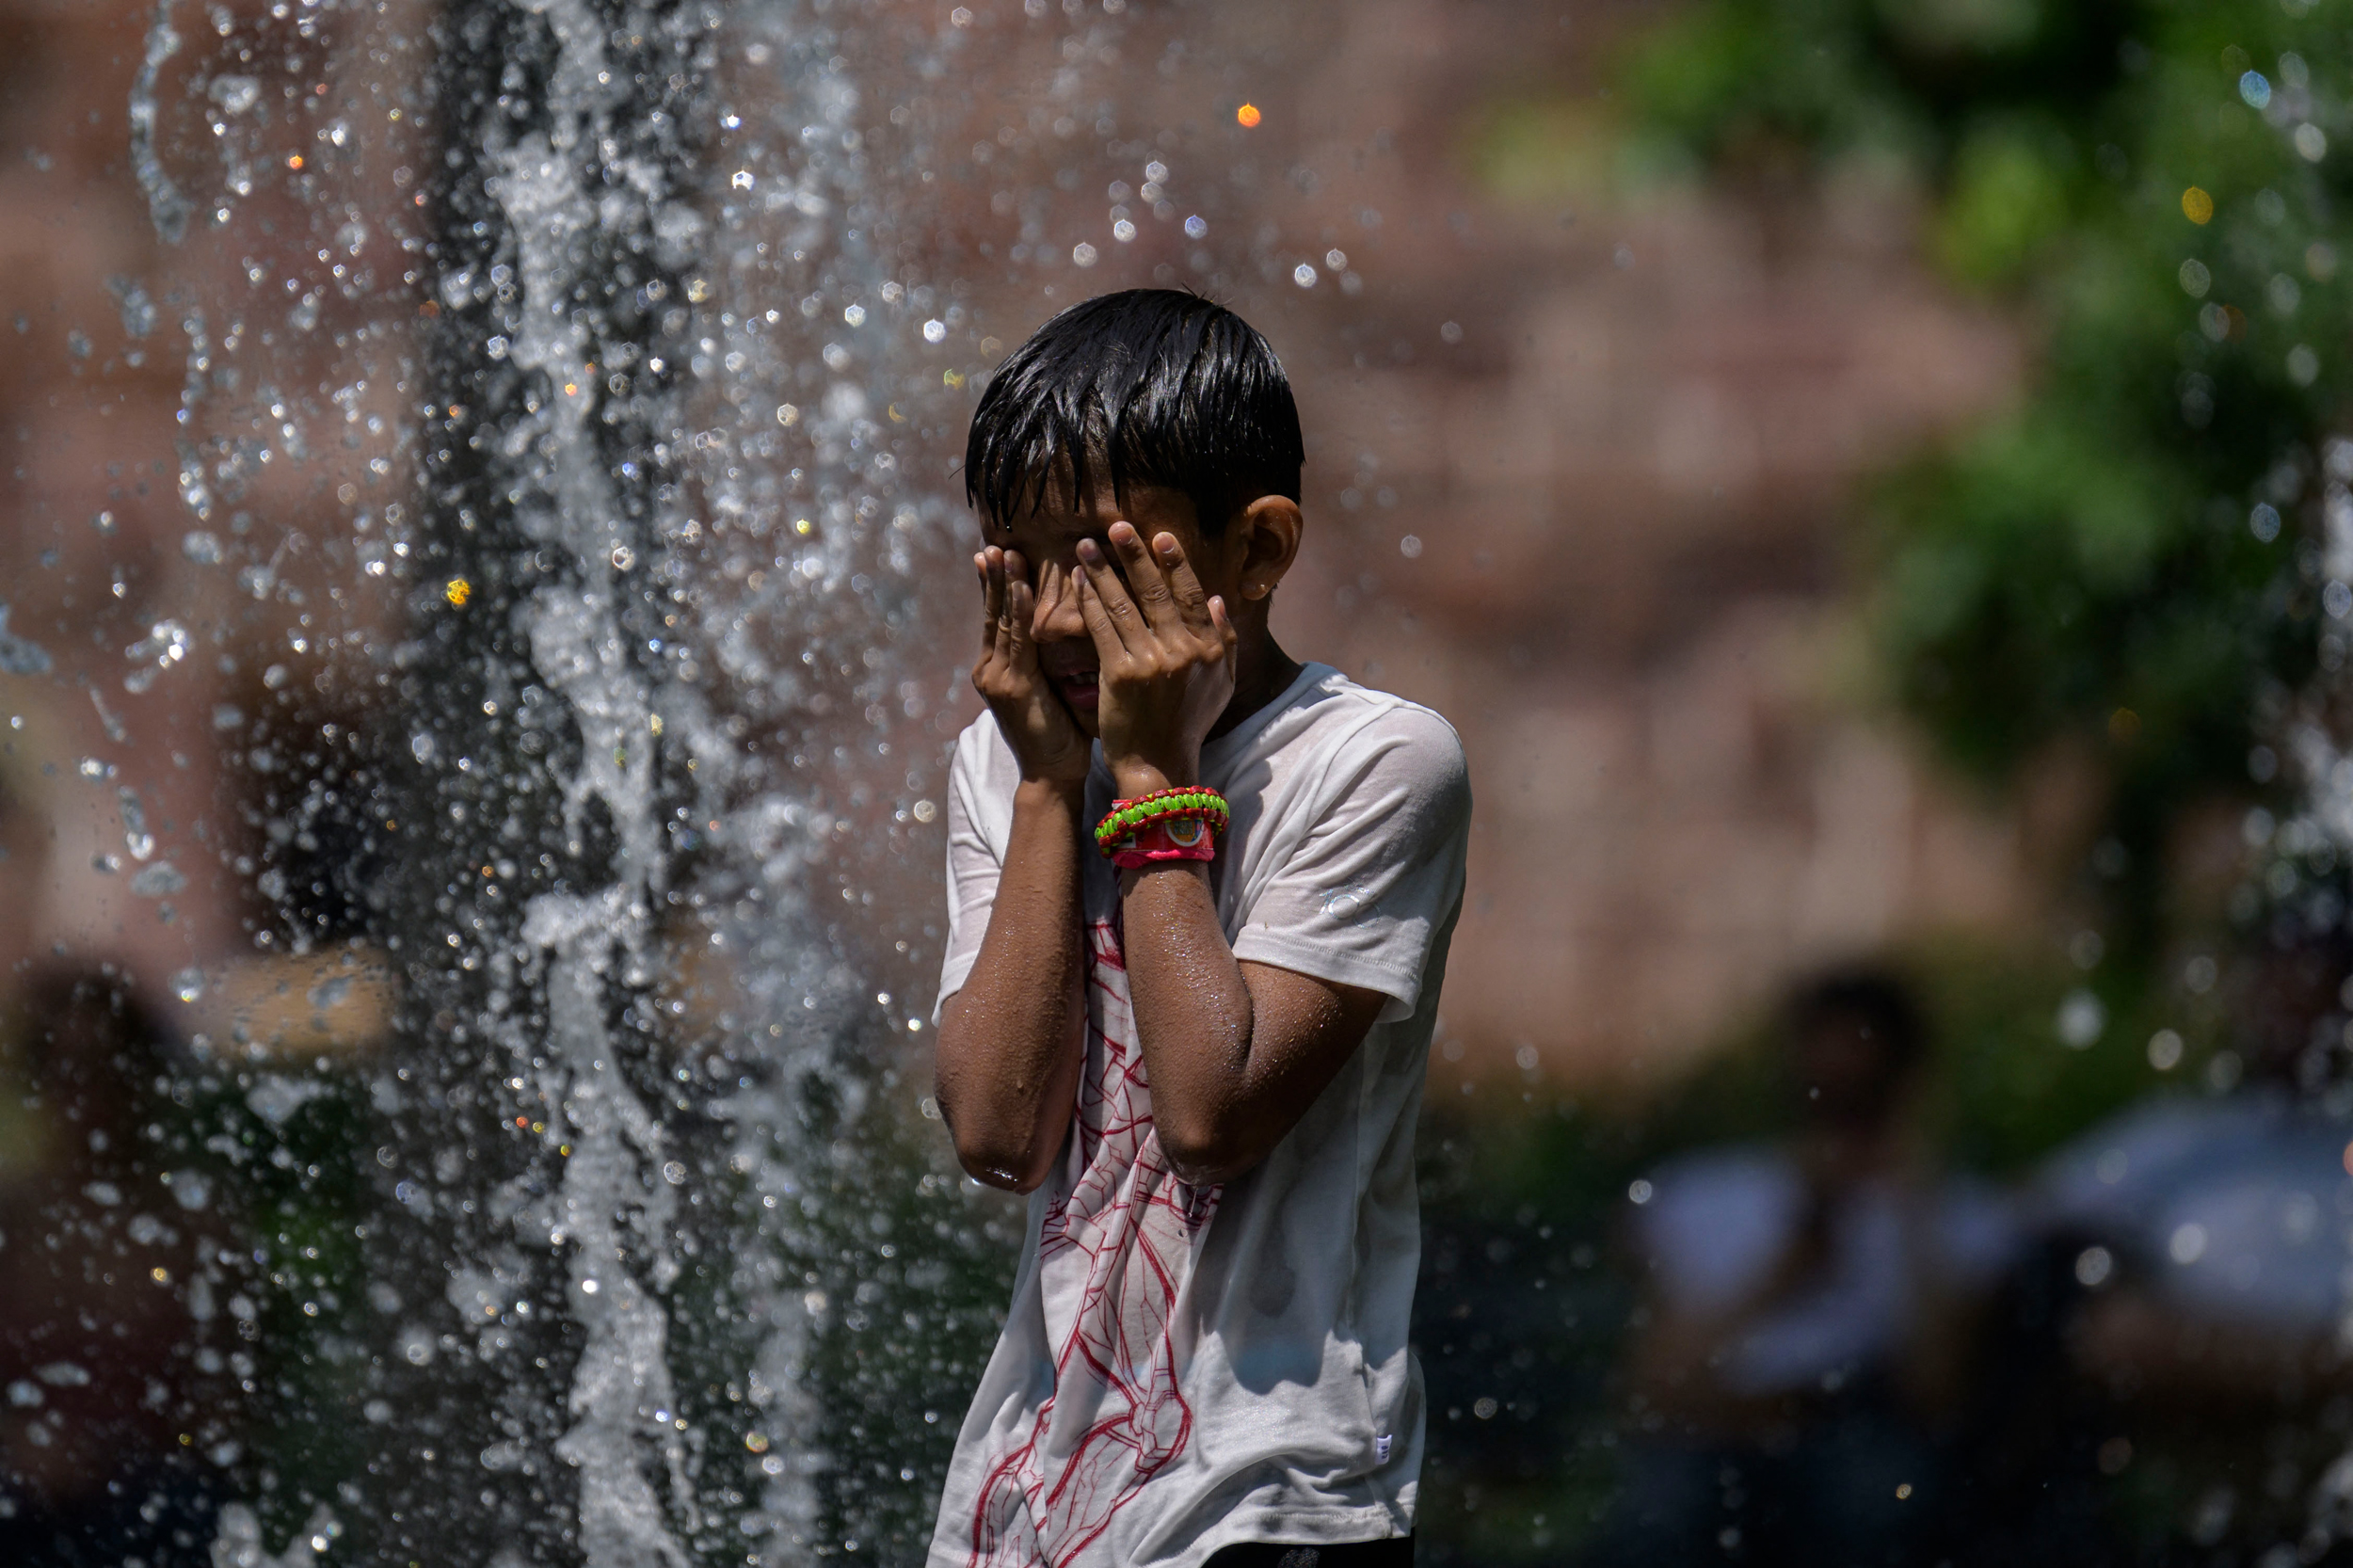 A boy cools off in a public fountain during a heat wave in New York on July 26, 2023. Credit: Angela Weiss/AFP via Getty Images